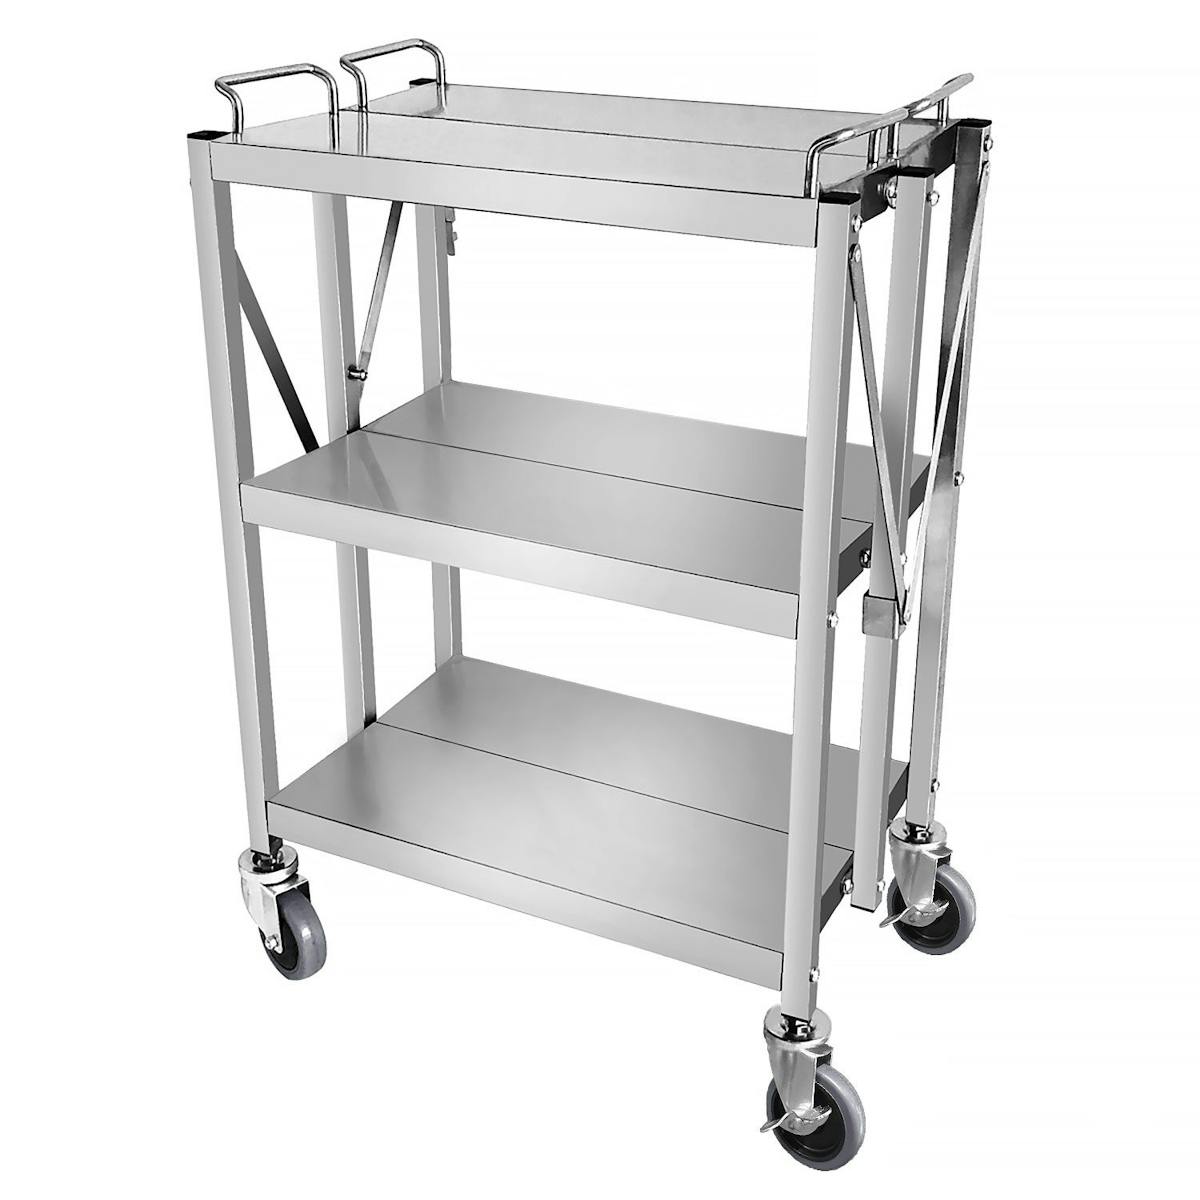 Serving trolley 0,63 m - foldable